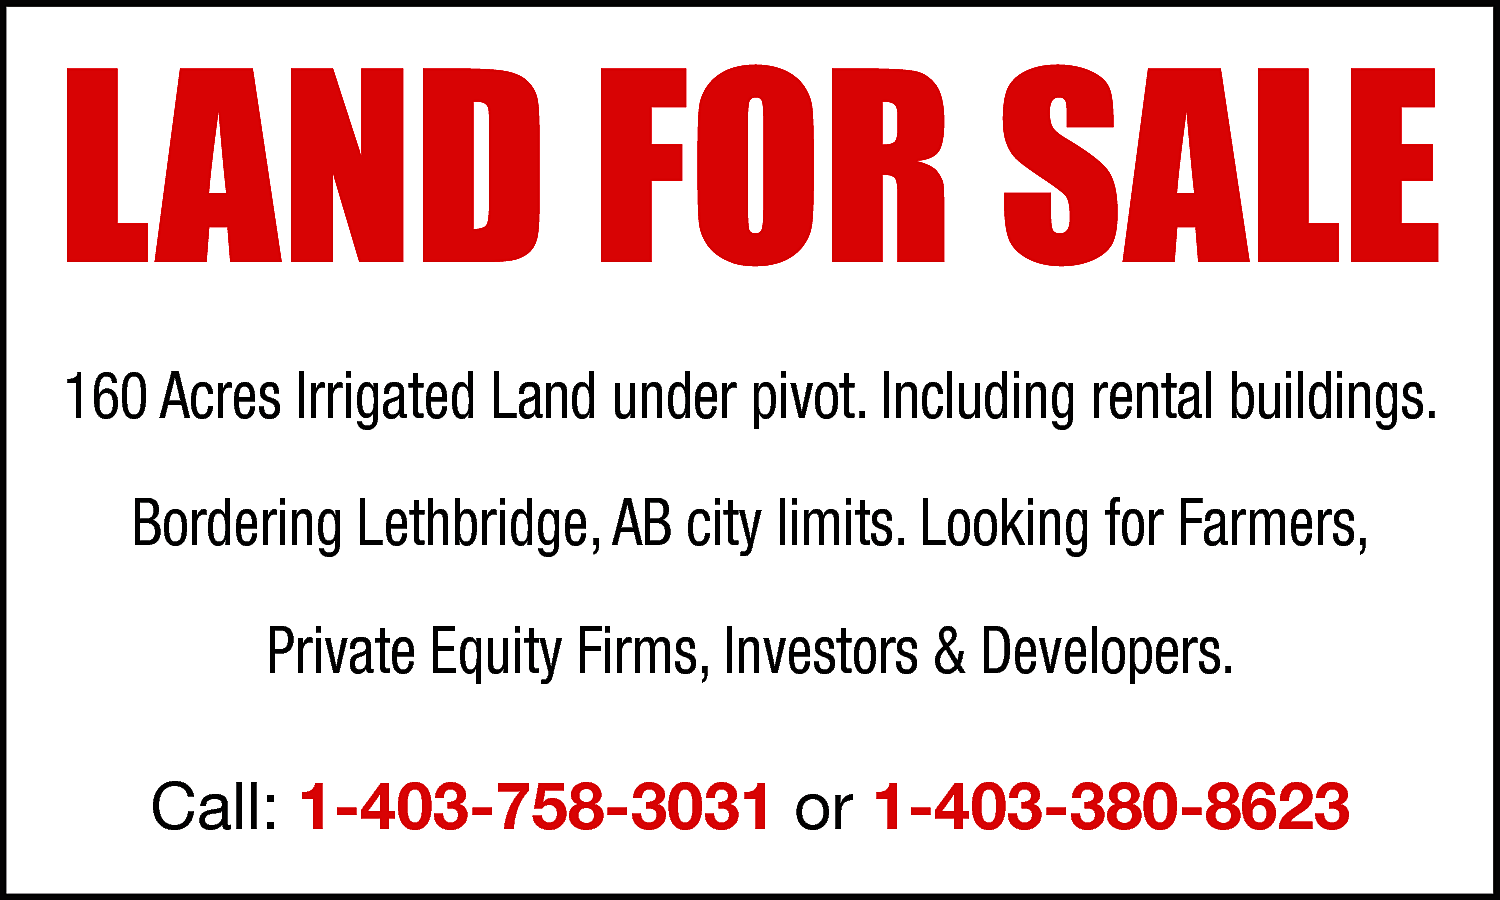 LAND FOR SALE <br>160 Acres  LAND FOR SALE  160 Acres Irrigated Land under pivot. Including rental buildings.  Bordering Lethbridge, AB city limits. Looking for Farmers,  Private Equity Firms, Investors & Developers.  Call: 1-403-758-3031 or 1-403-380-8623    